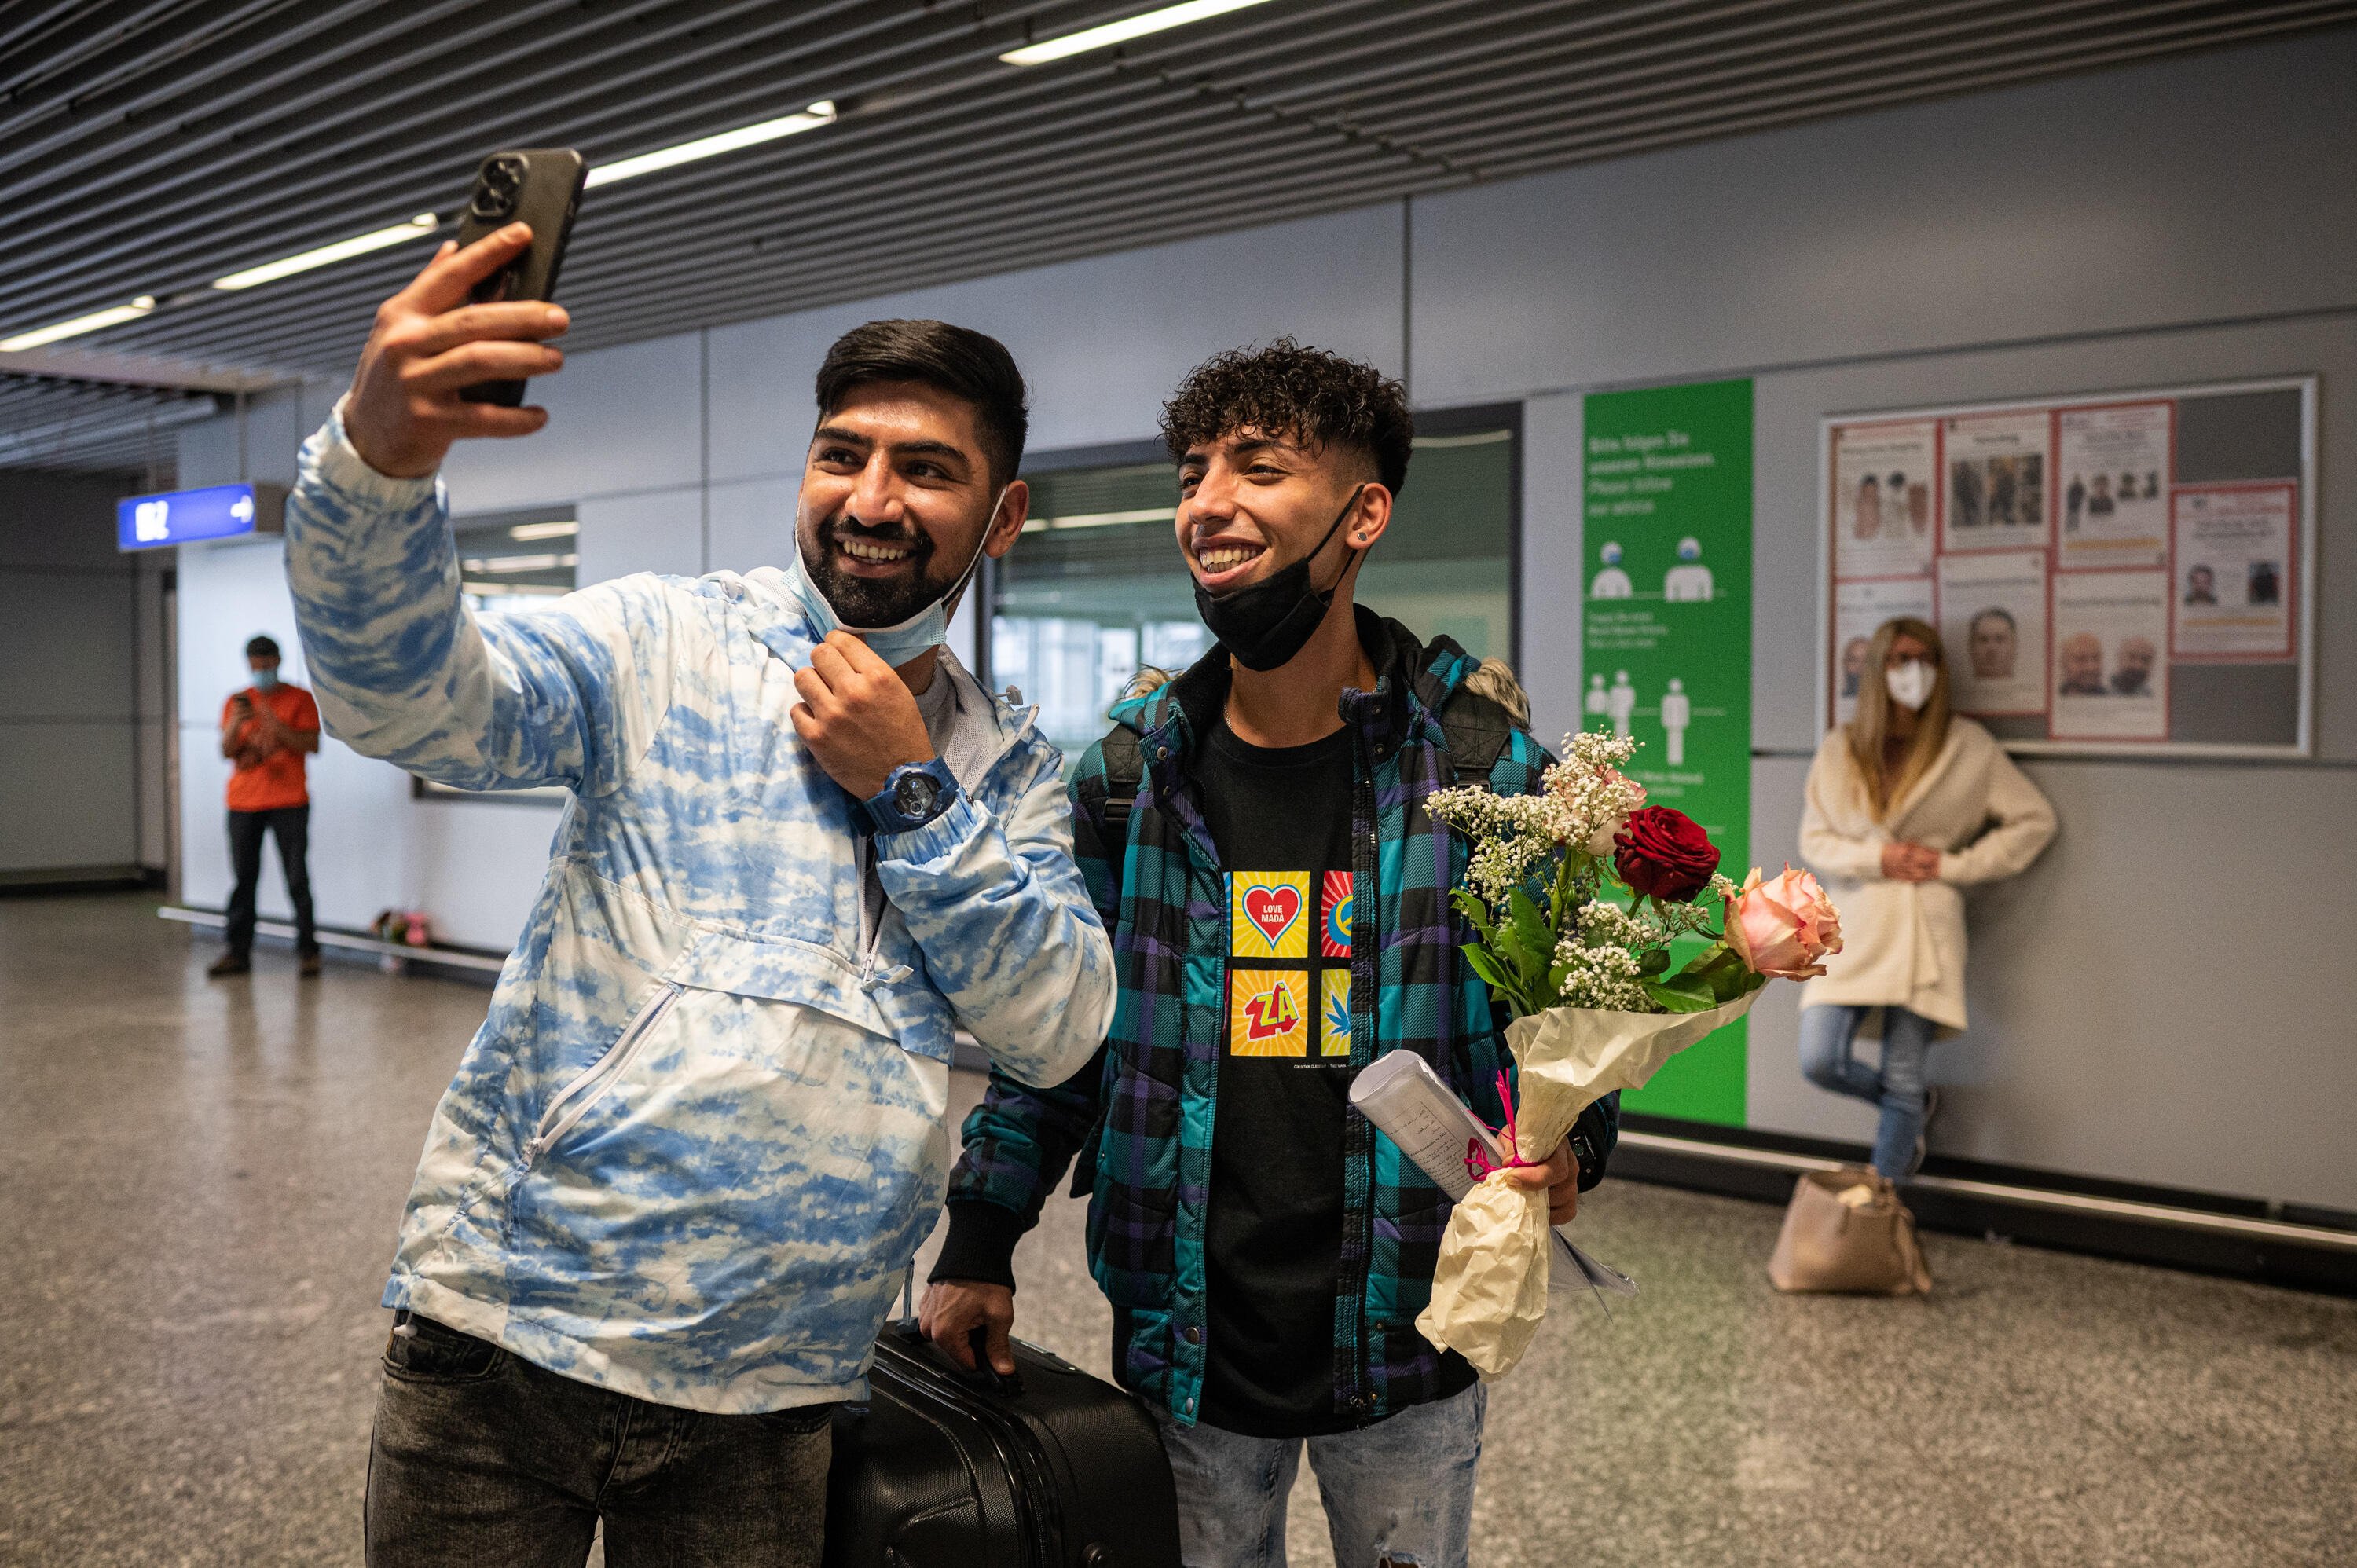 Afghan refugee brothers Ali, 17, and Mehdi, 29, take a selfie photo together after being reunited at the Frankfurt, Germany airport.